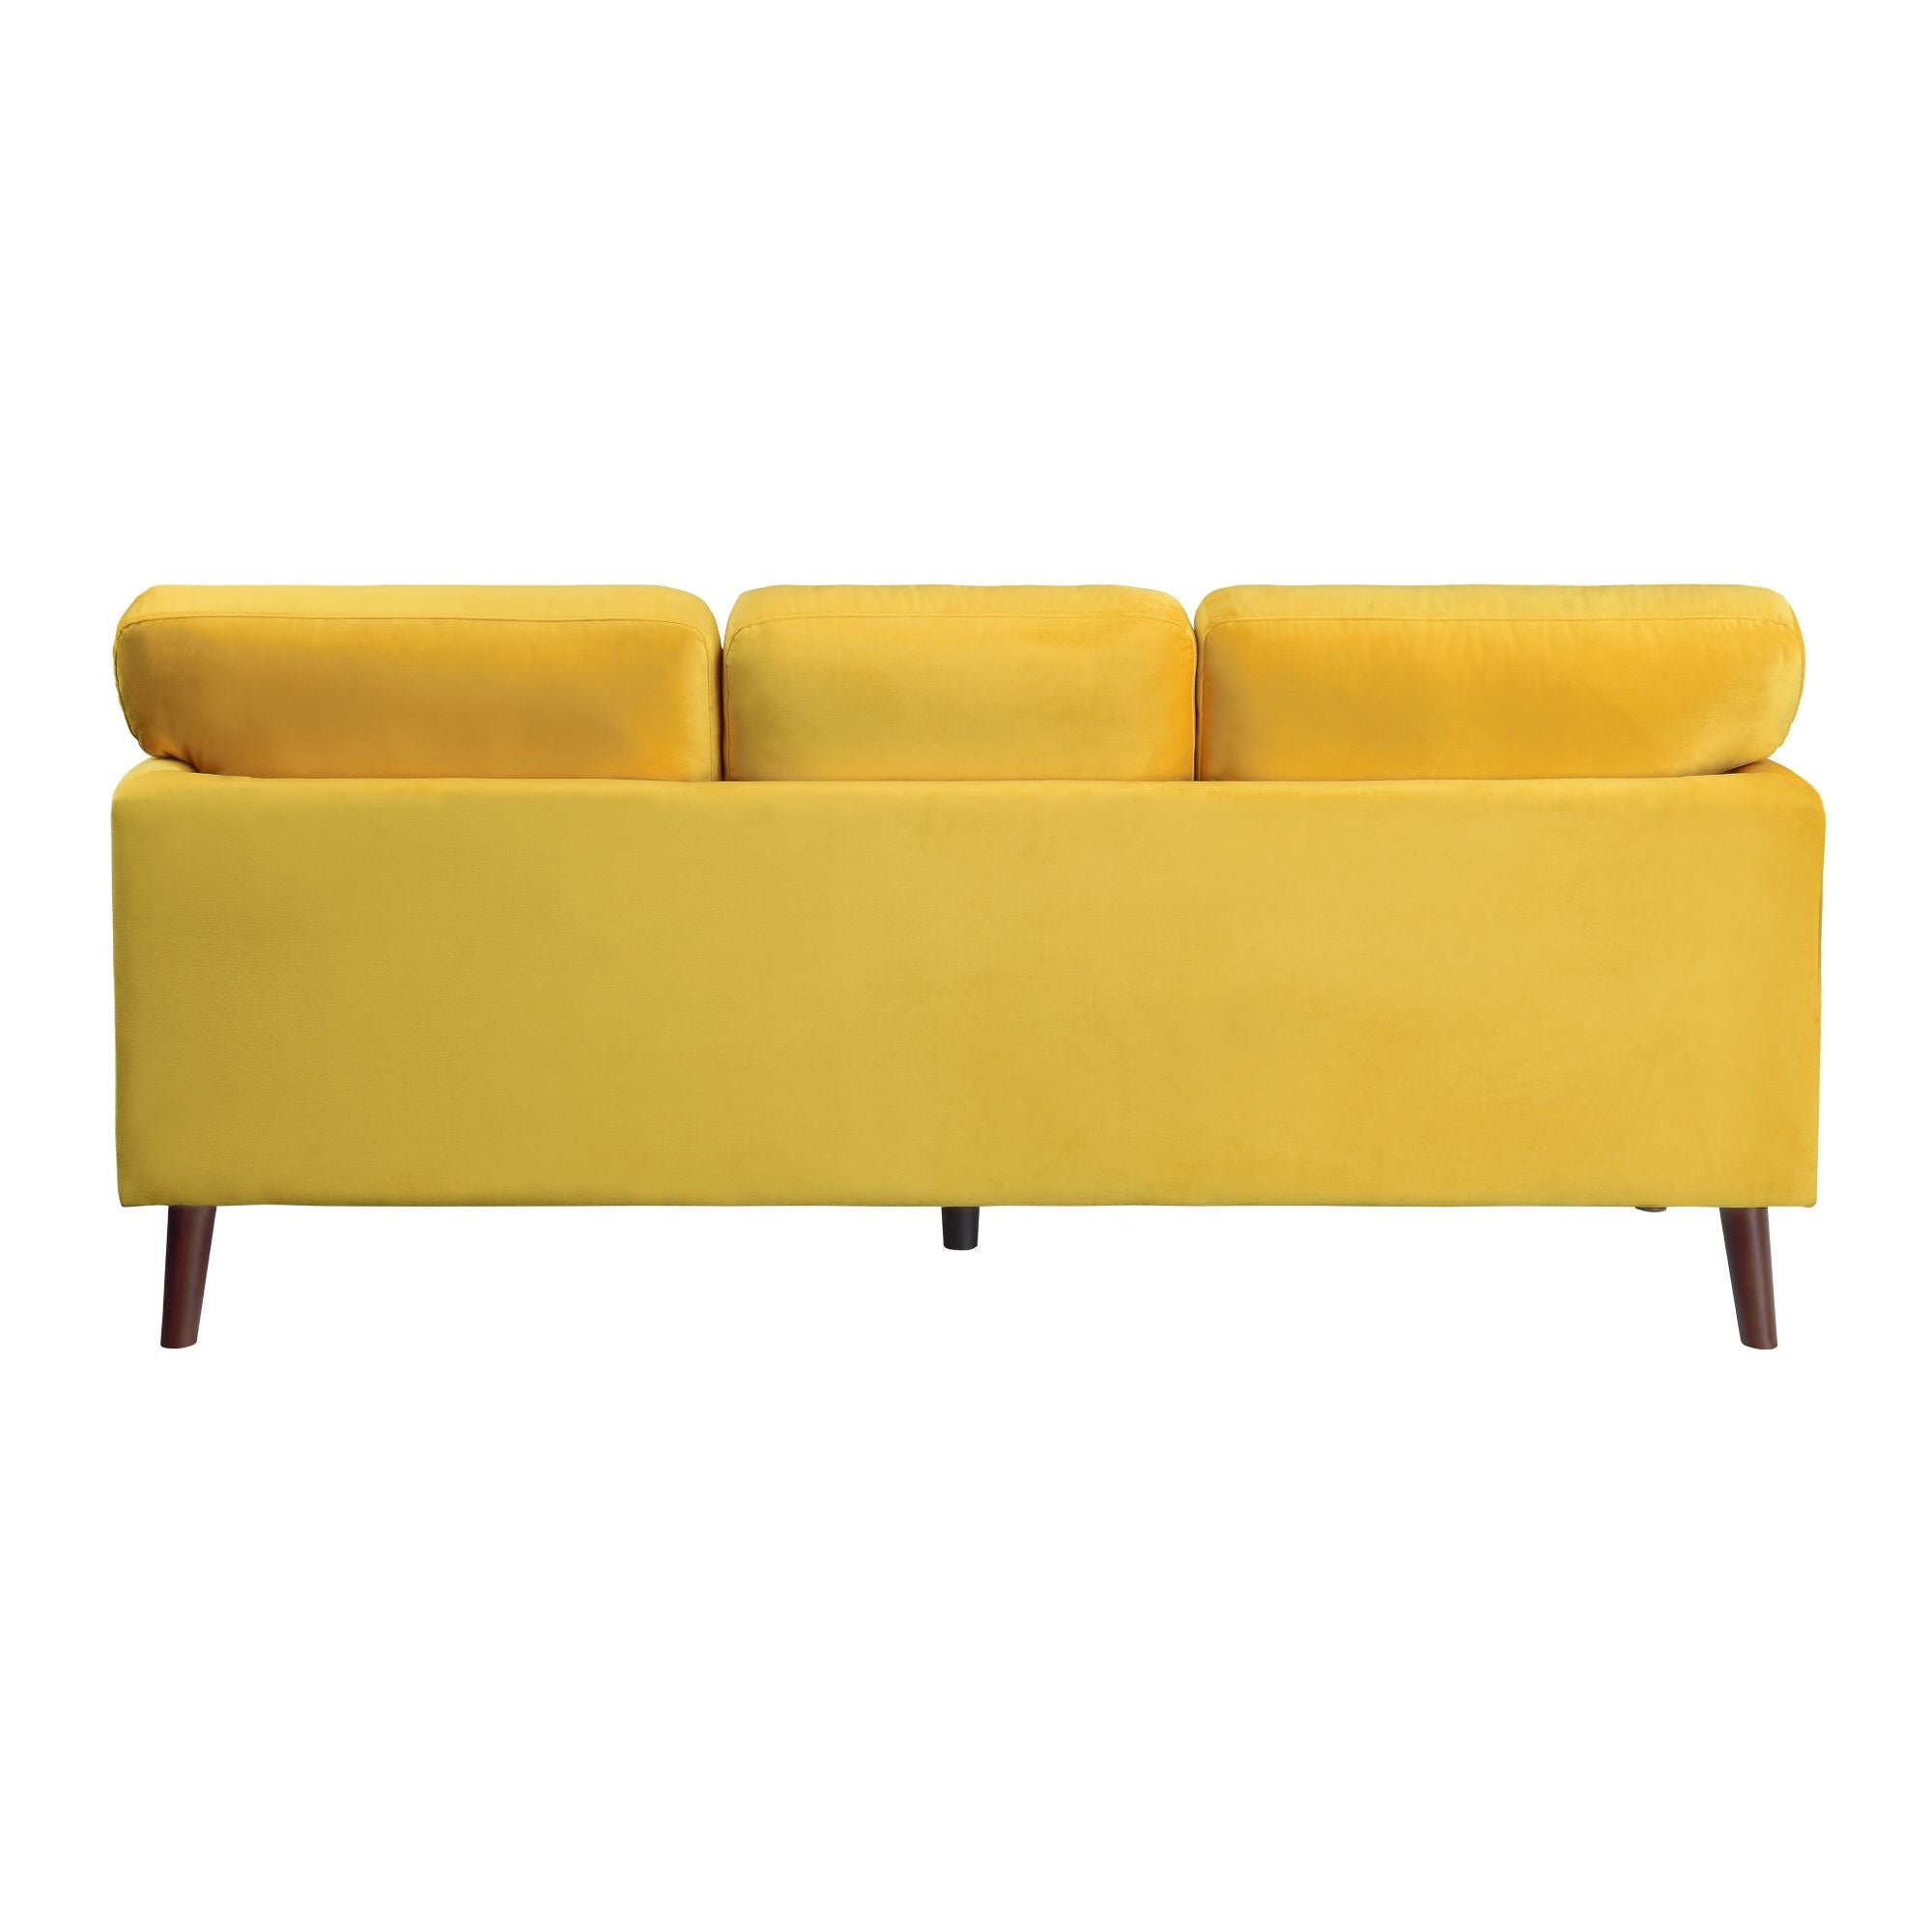 Tolley Sofa Collection Yellow 9338